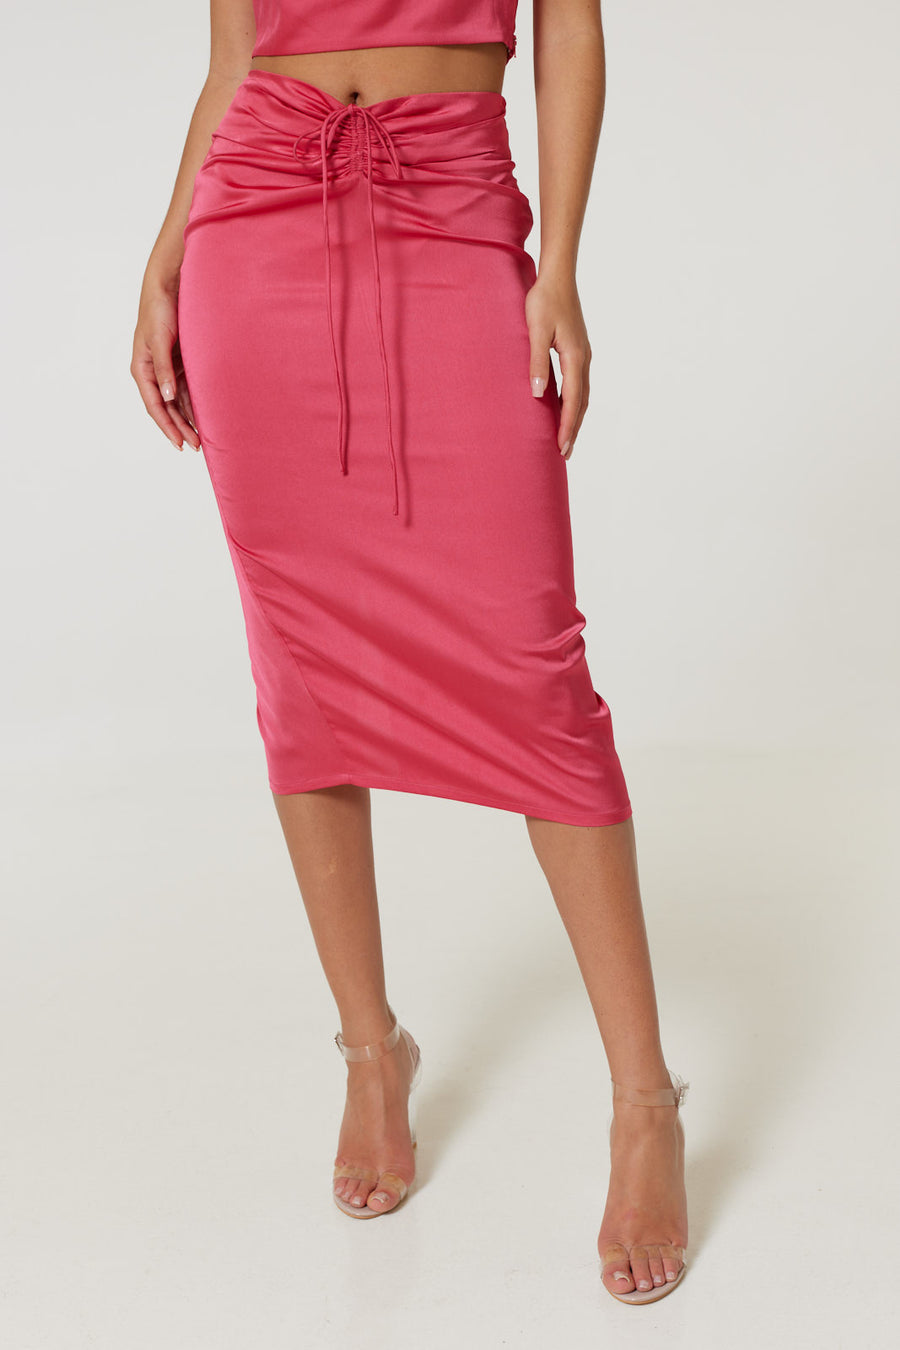 Lili Skirt in Recycled Satin in Hot Pink